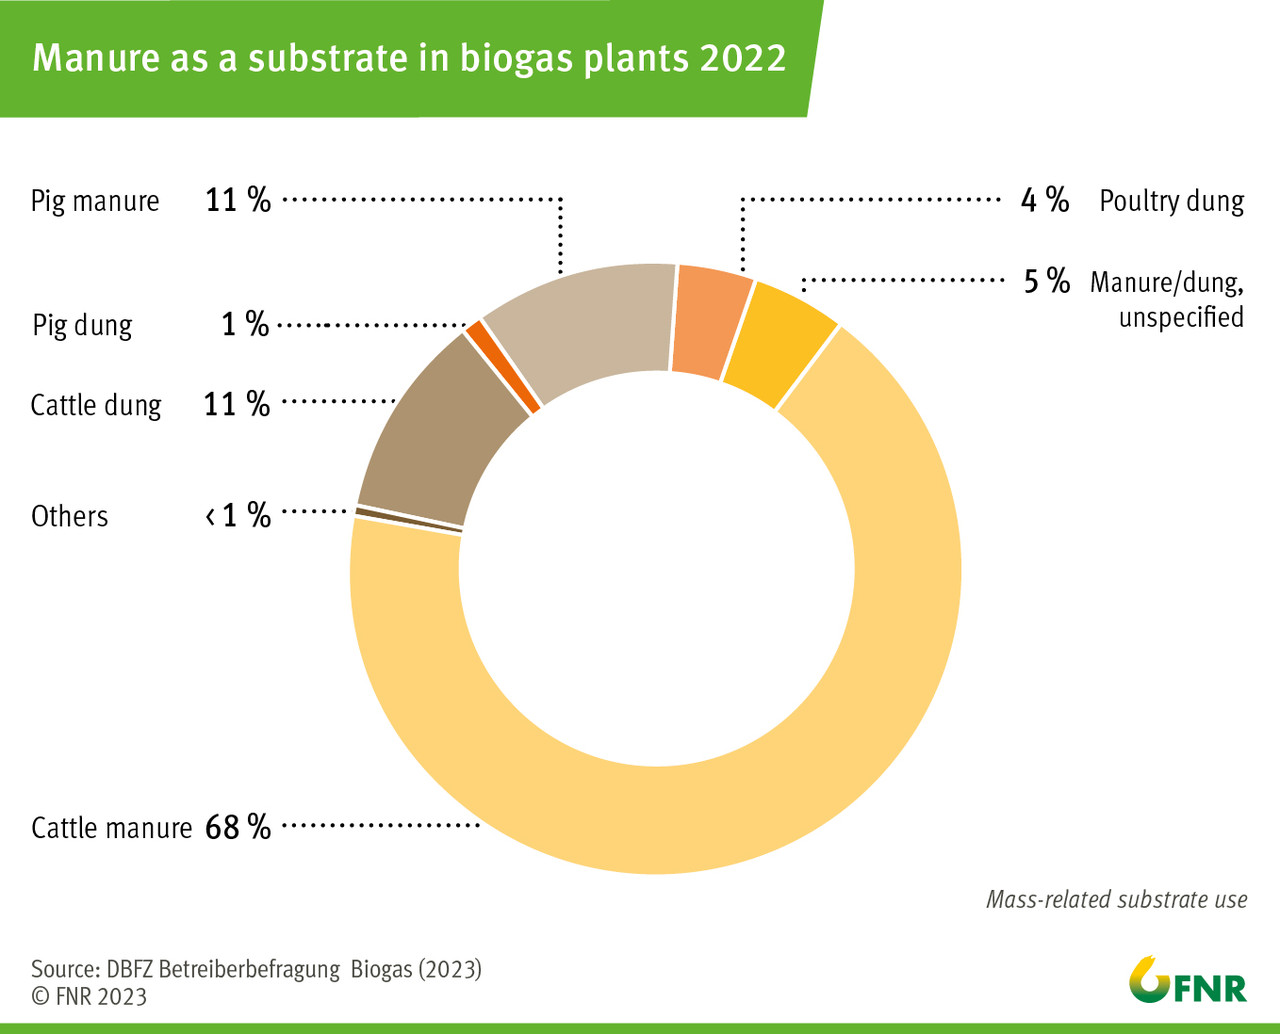 Manure as a substrate in biogas plants 2022